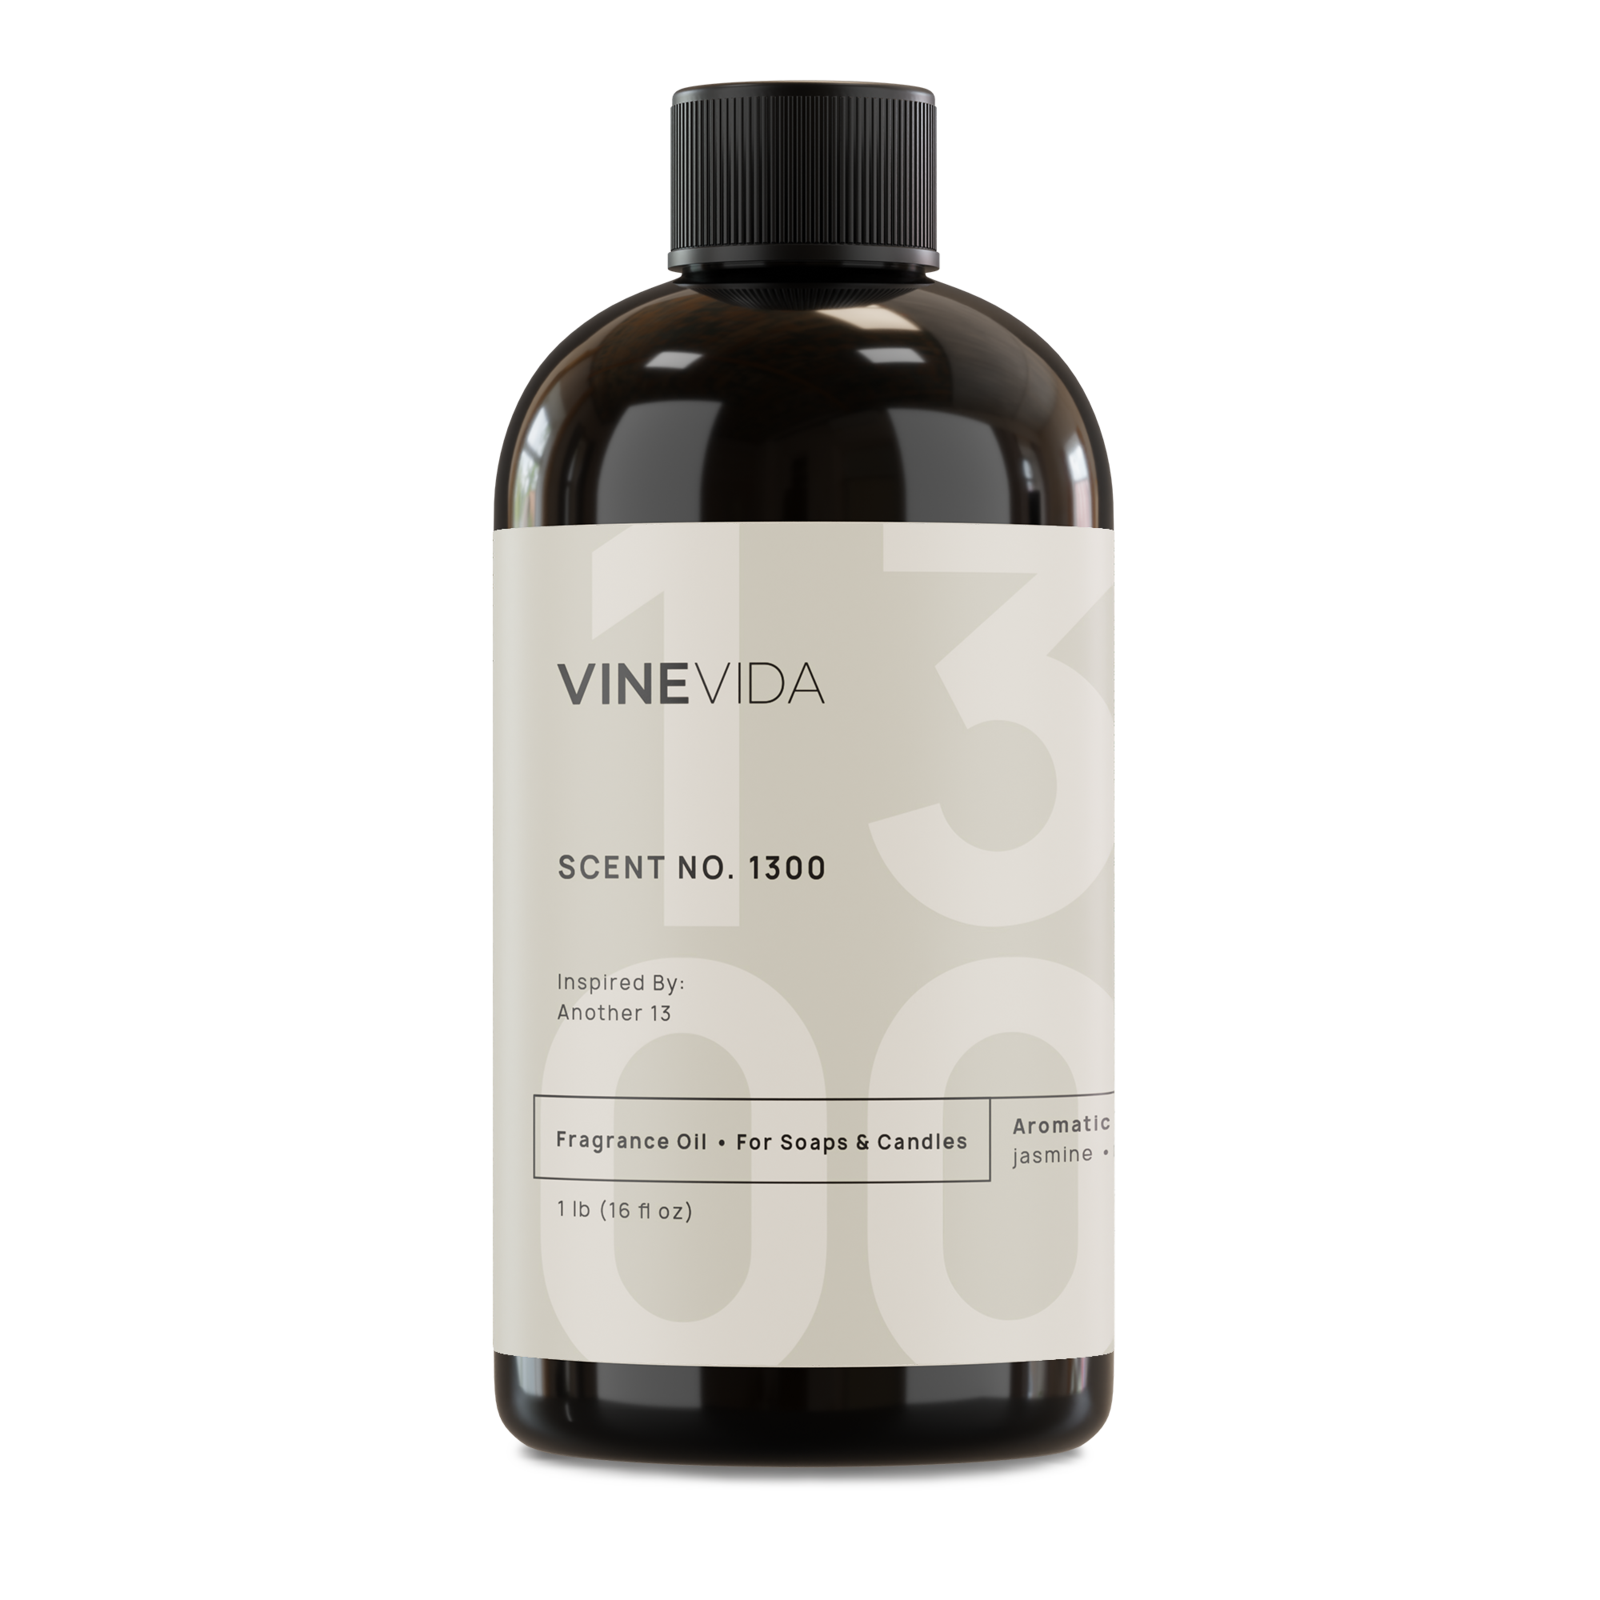 NO. 1300 Fragrance Oil for Soaps & Candles - Inspired by: Another 13 by Le Labo